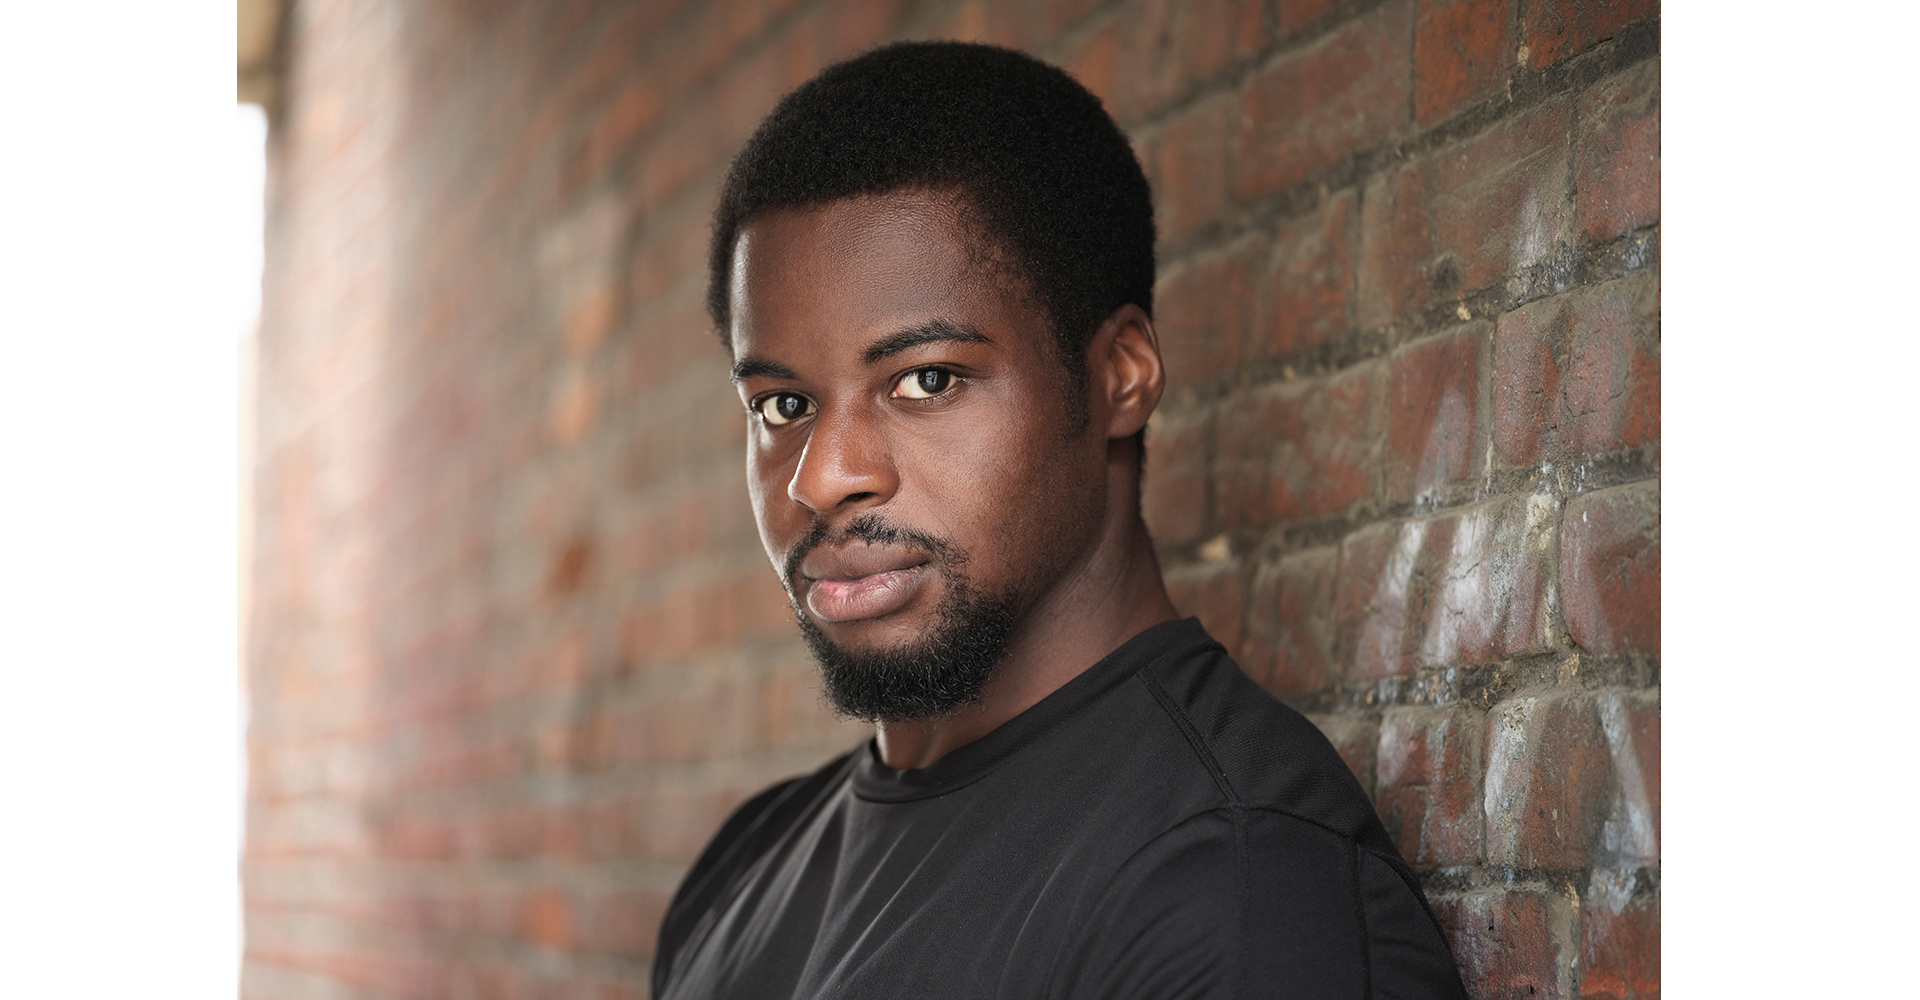 actor standing front brick wall in a black top actor head shot natural light